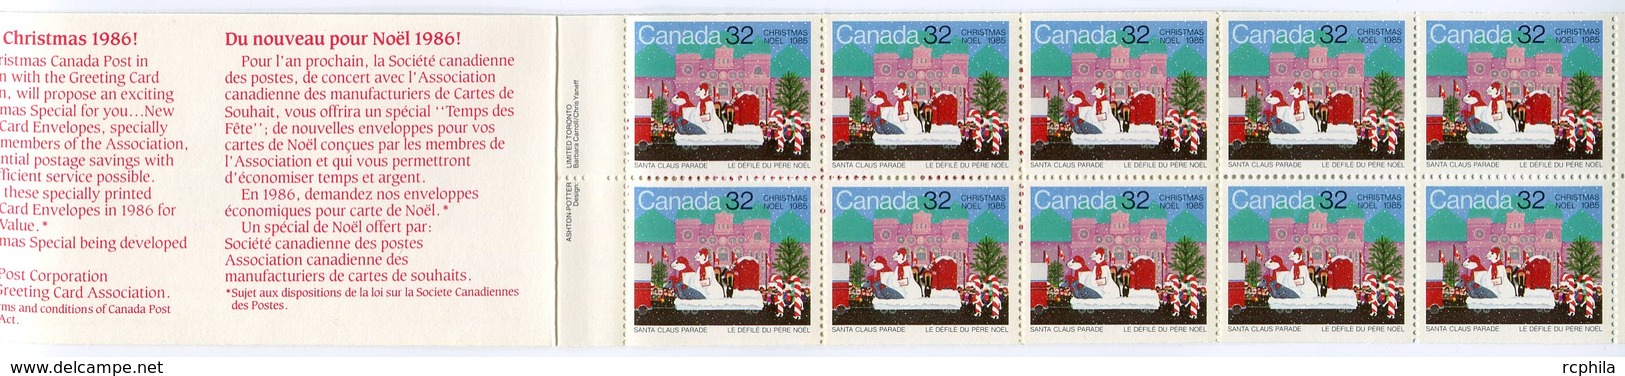 RC 16022 CANADA BK88 CHRISTMAS 1985 CARNET COMPLET BOOKLET MNH NEUF ** - Libretti Completi